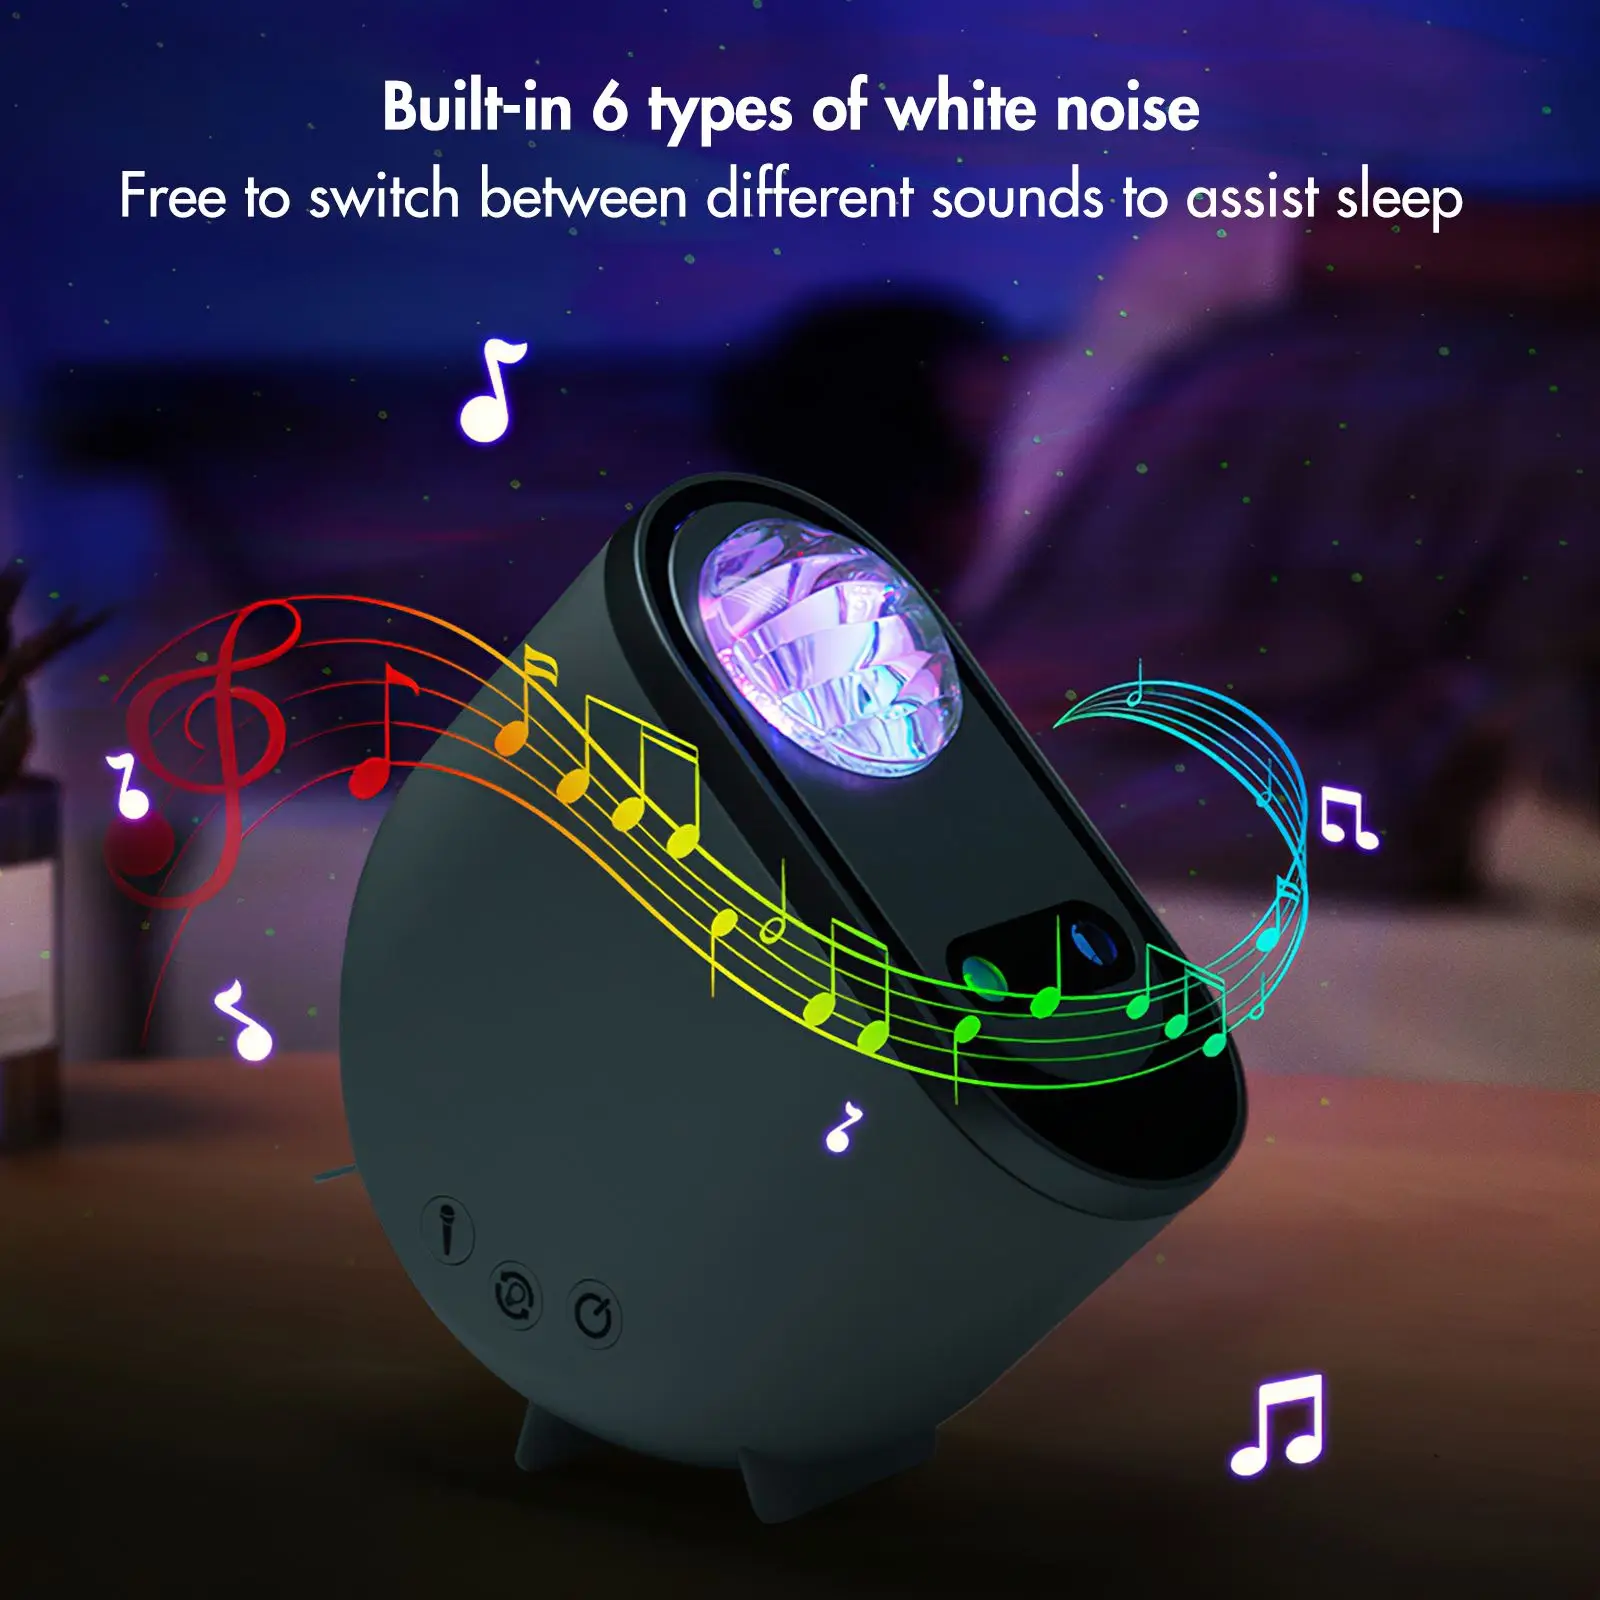 Adjustable Starlight Projectors With Remote Control Timing Function Atmosphere Ceiling Night Light Decoration Luminaires Gift